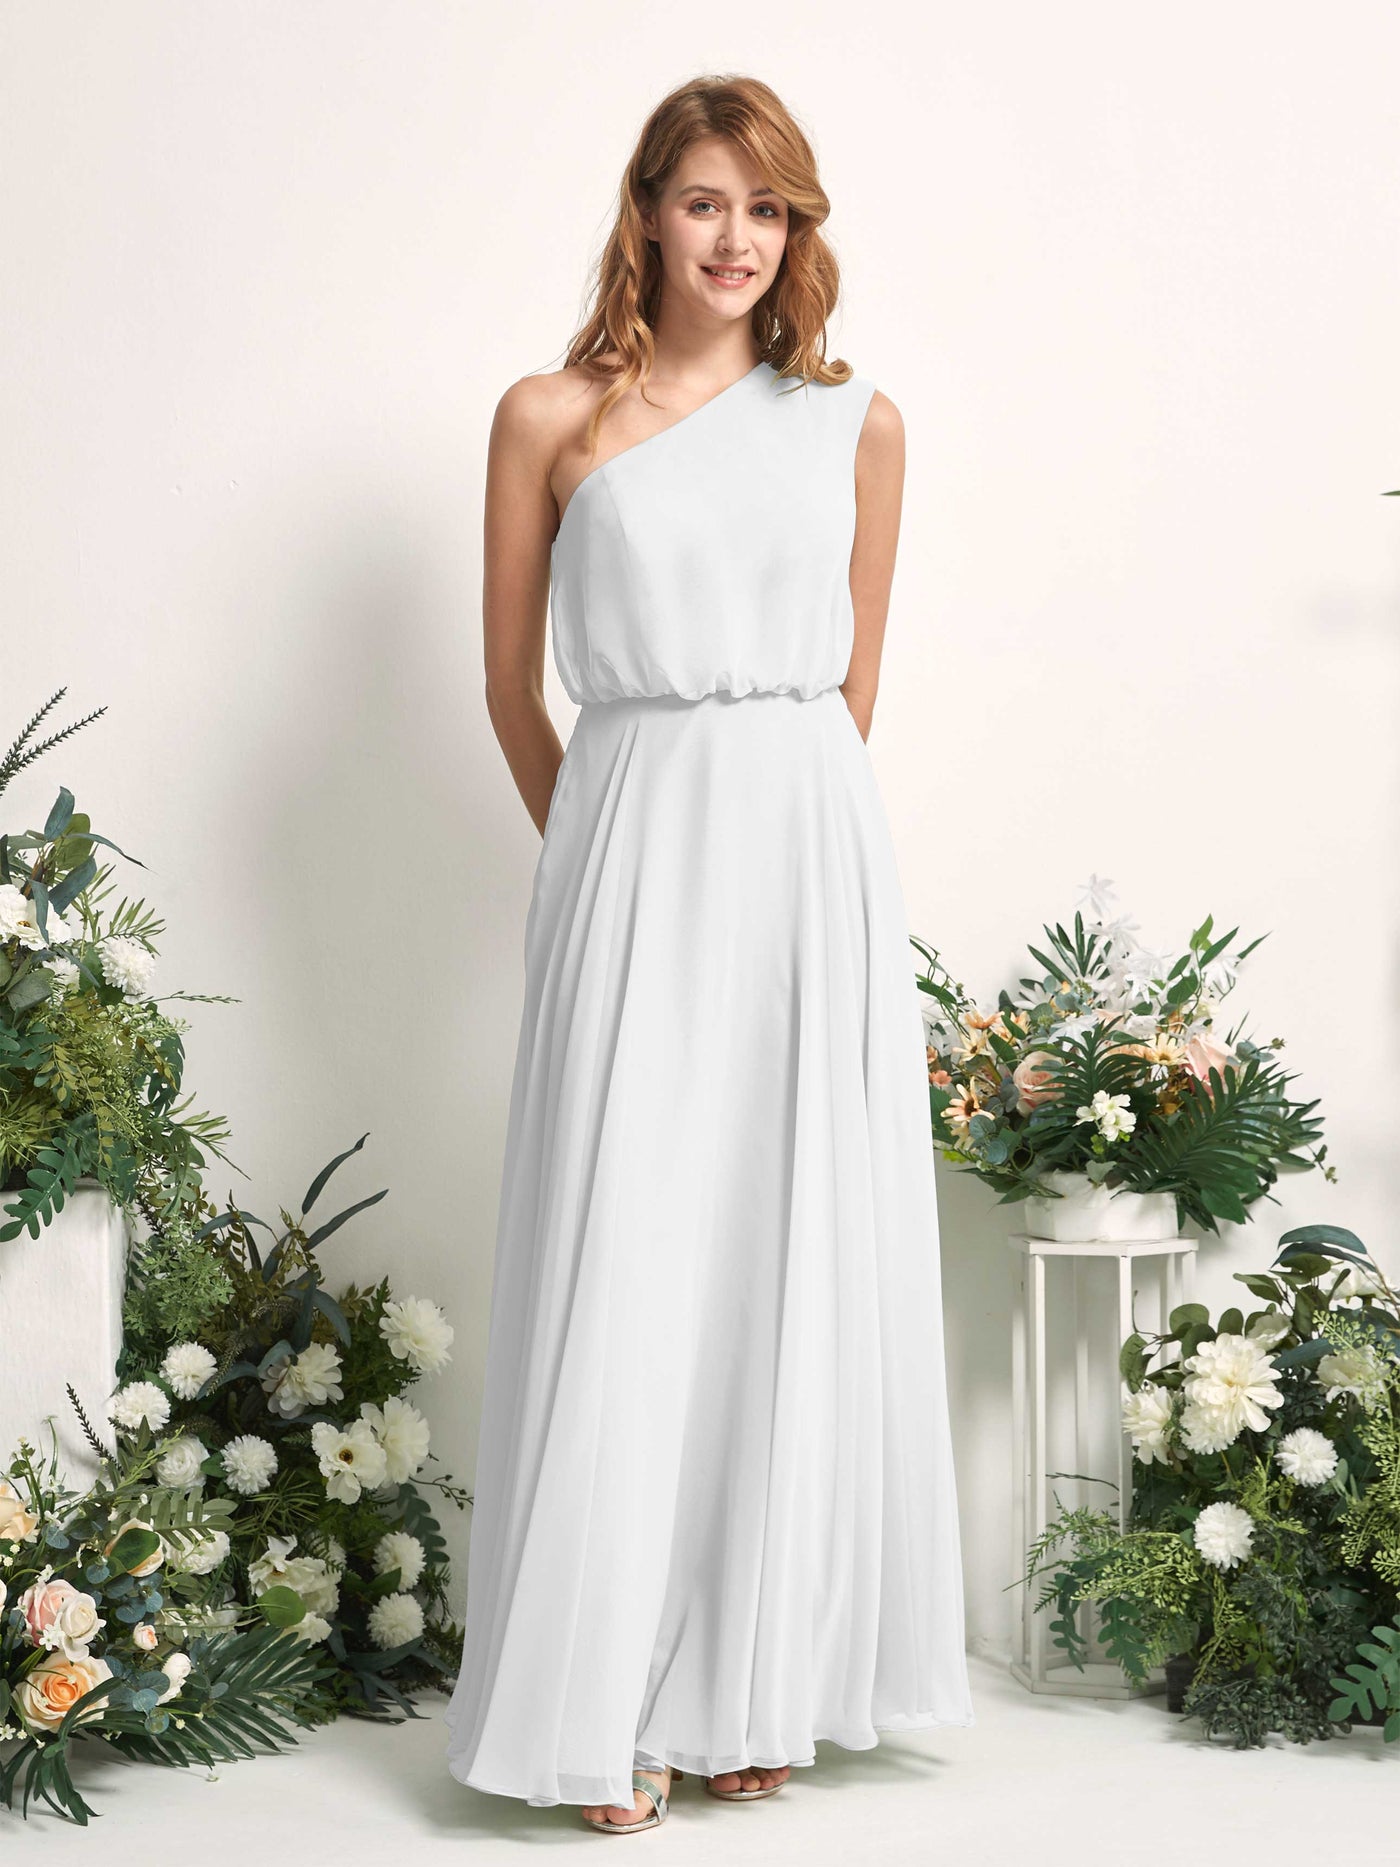 Bridesmaid Dress A-line Chiffon One Shoulder Full Length Sleeveless Wedding Party Dress - White (81226842)#color_white